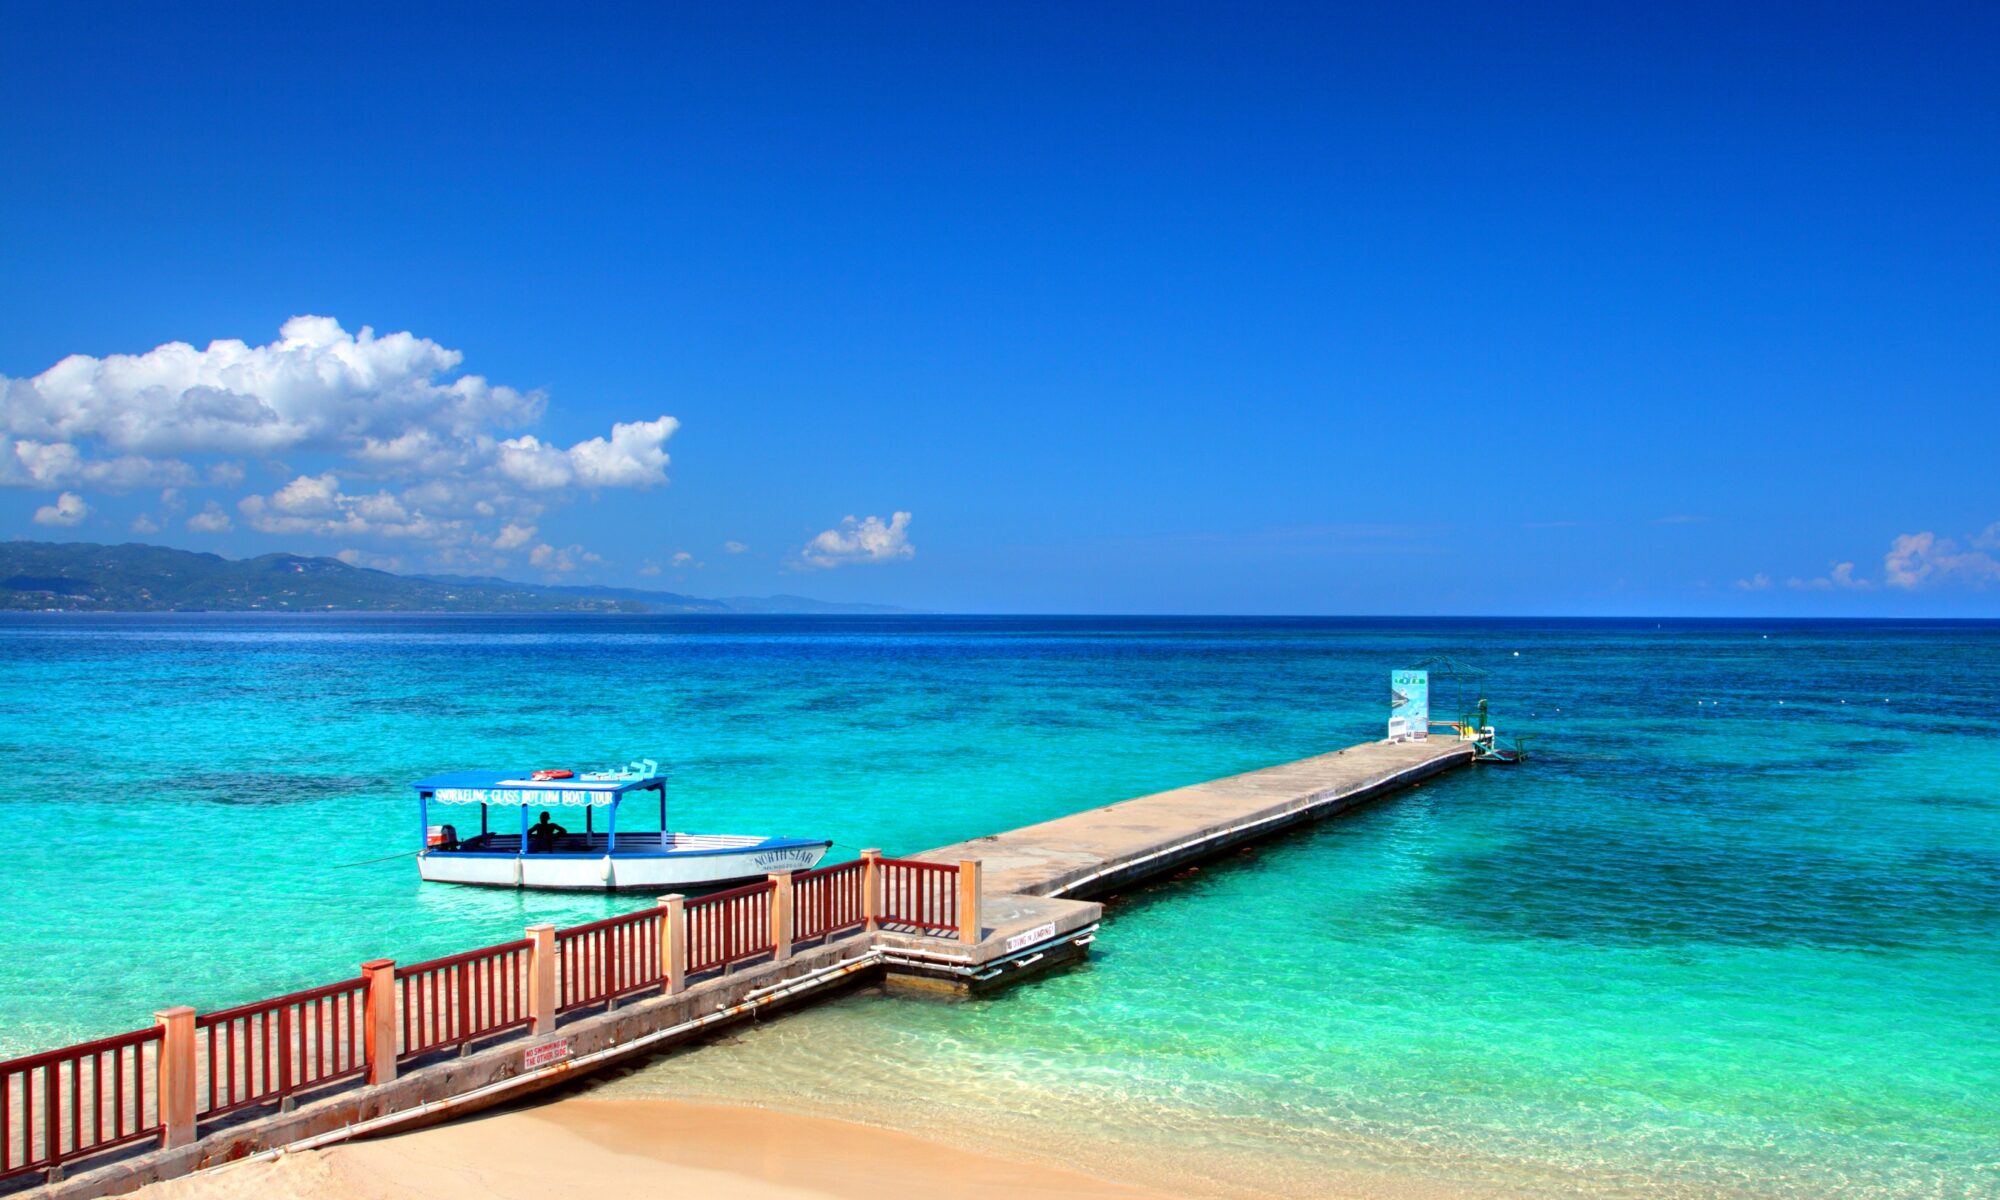 The Best Hotels In Jamaica